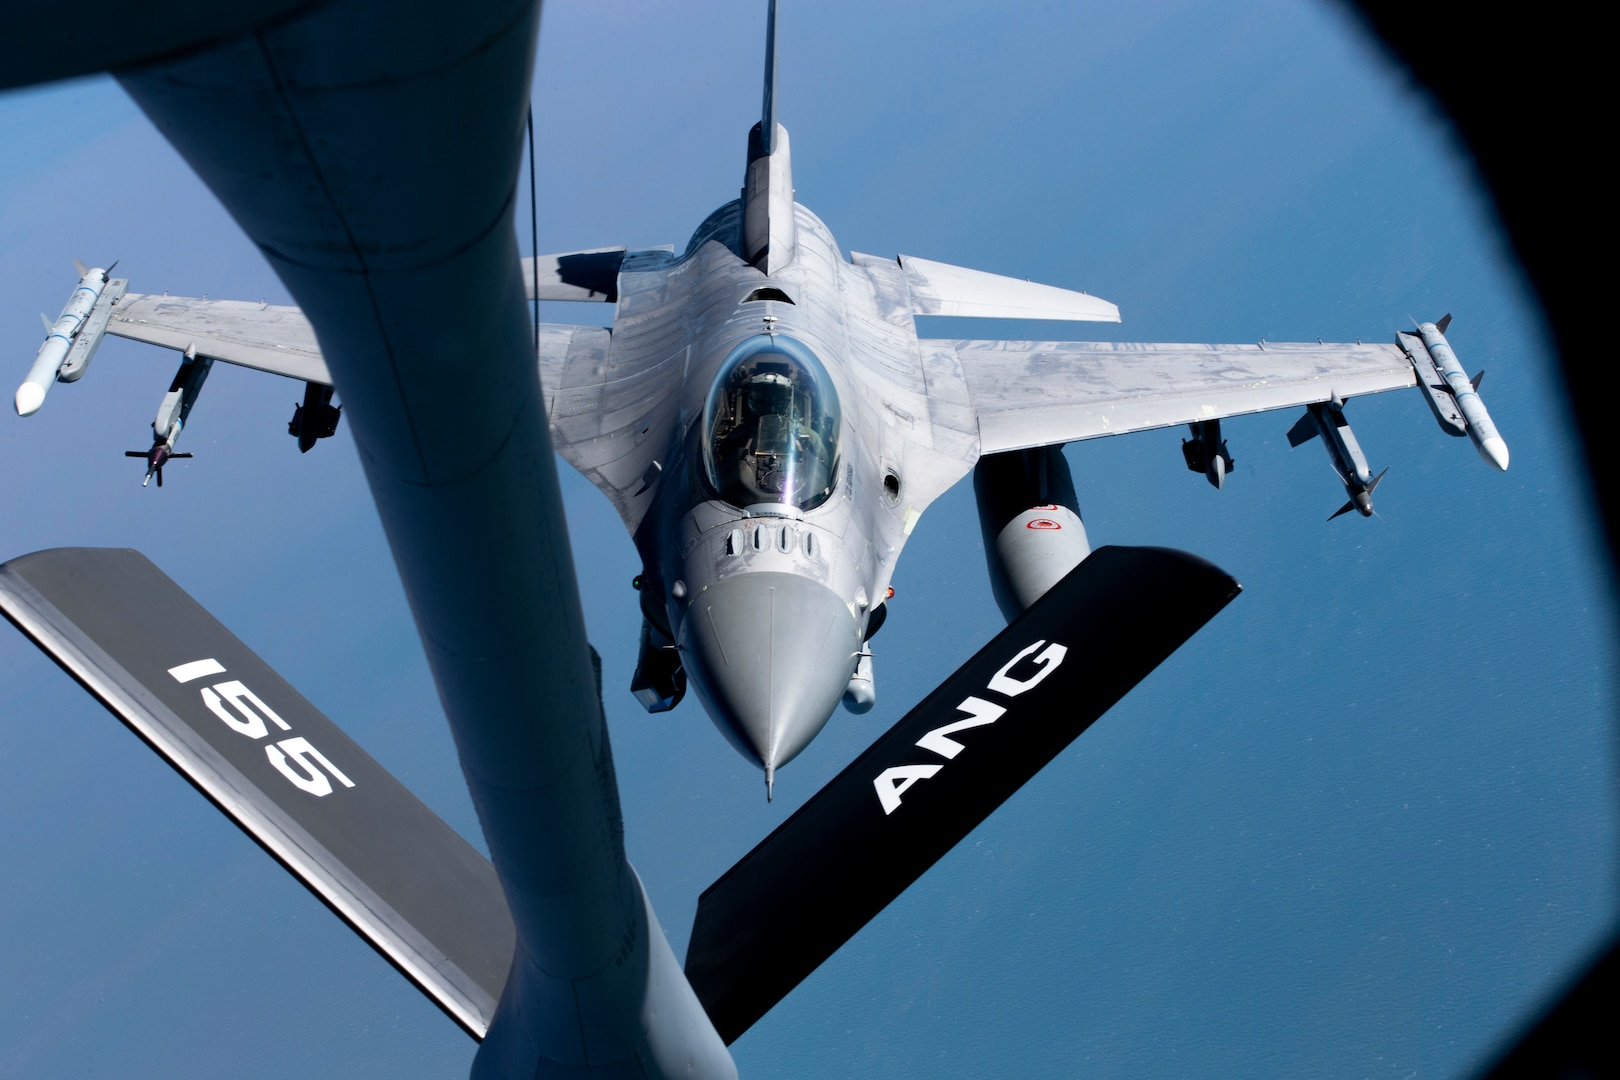 A U.S. Air Force F-16C Falcon from the 96th Test Wing prepares for in-flight refueling from a 155th Air Refueling Wing KC-135 Stratotanker during exercise Emerald Flag over the Gulf of Mexico, Dec. 3, 2020. More than 25 agencies participated in the exercise, hosted at Eglin Air Force Base, Fla. Emerald Flag combined ground, space, cyber, and air platforms for joint test and experimentation.